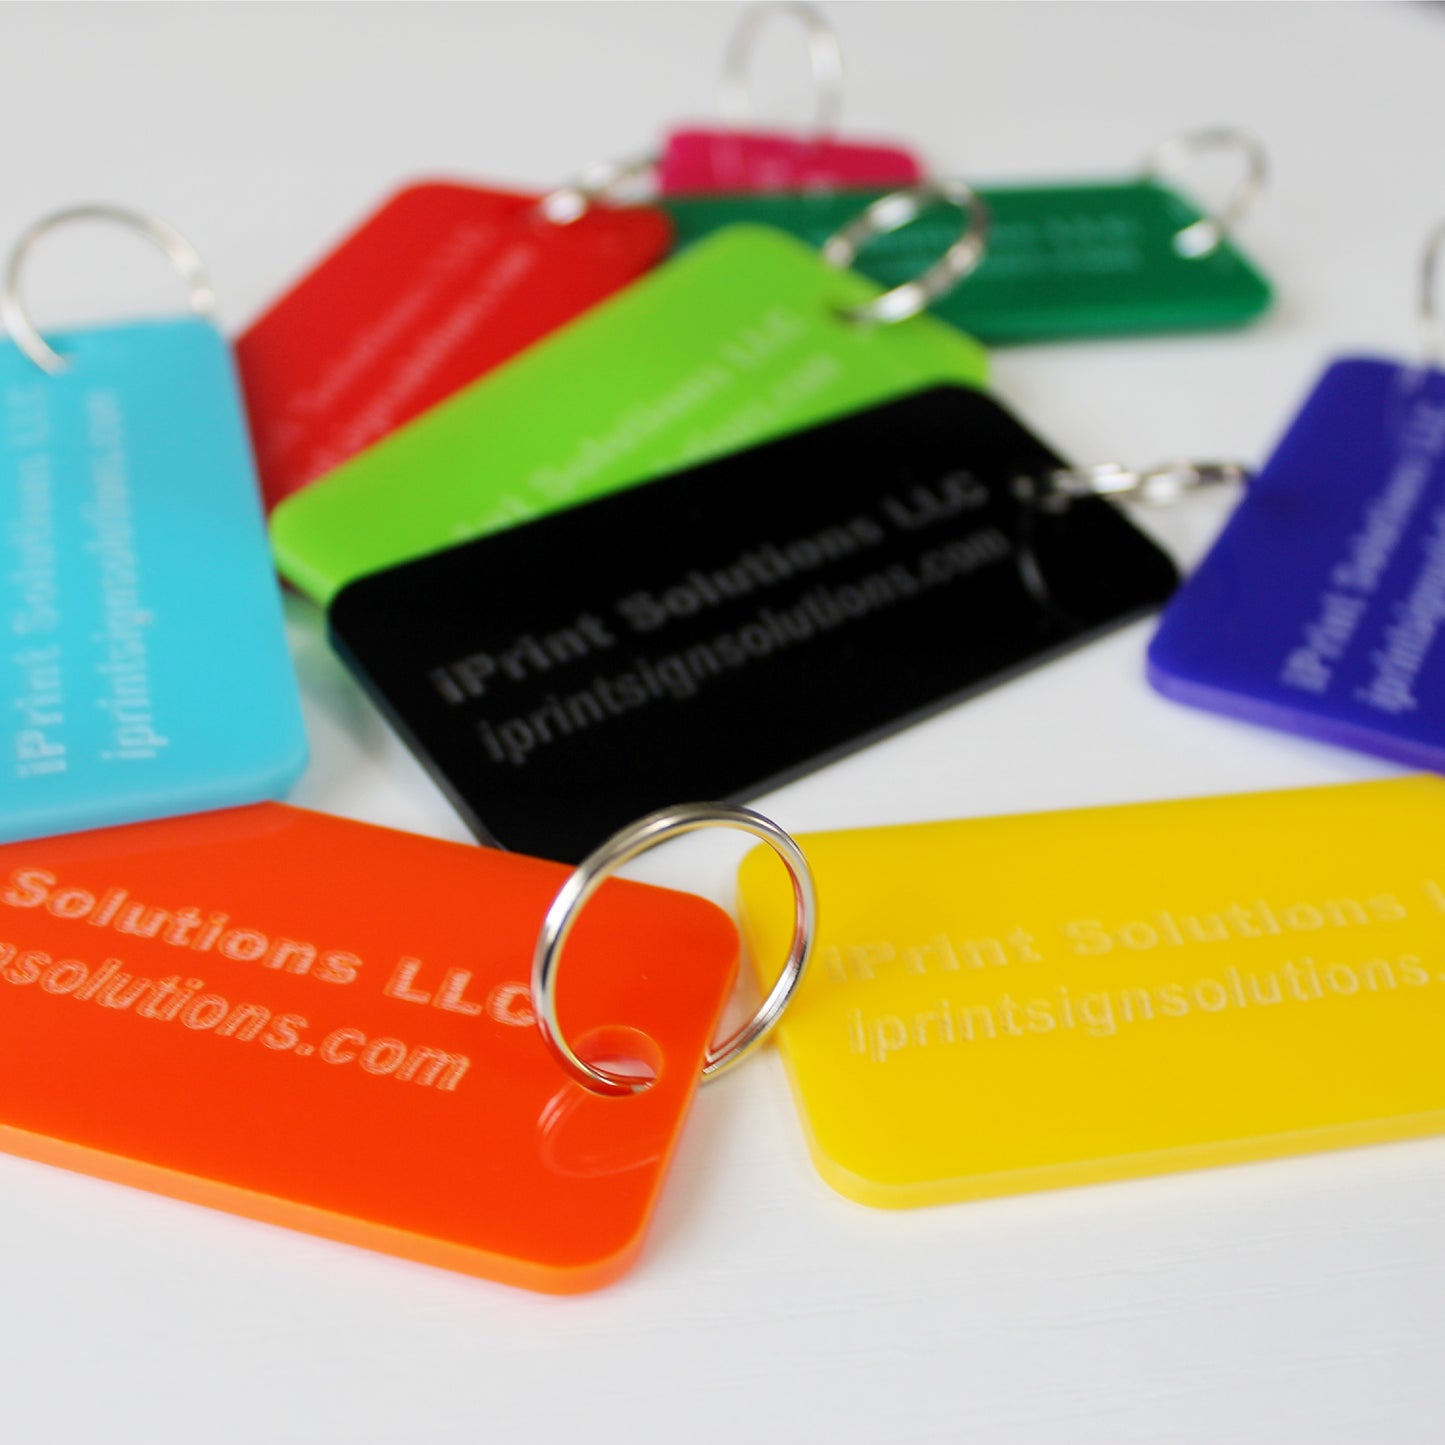 Custom keychain gift, Custom acrylic keychains, Personalized keychains for businesses, Engraved acrylic keychains, keychains for marketing